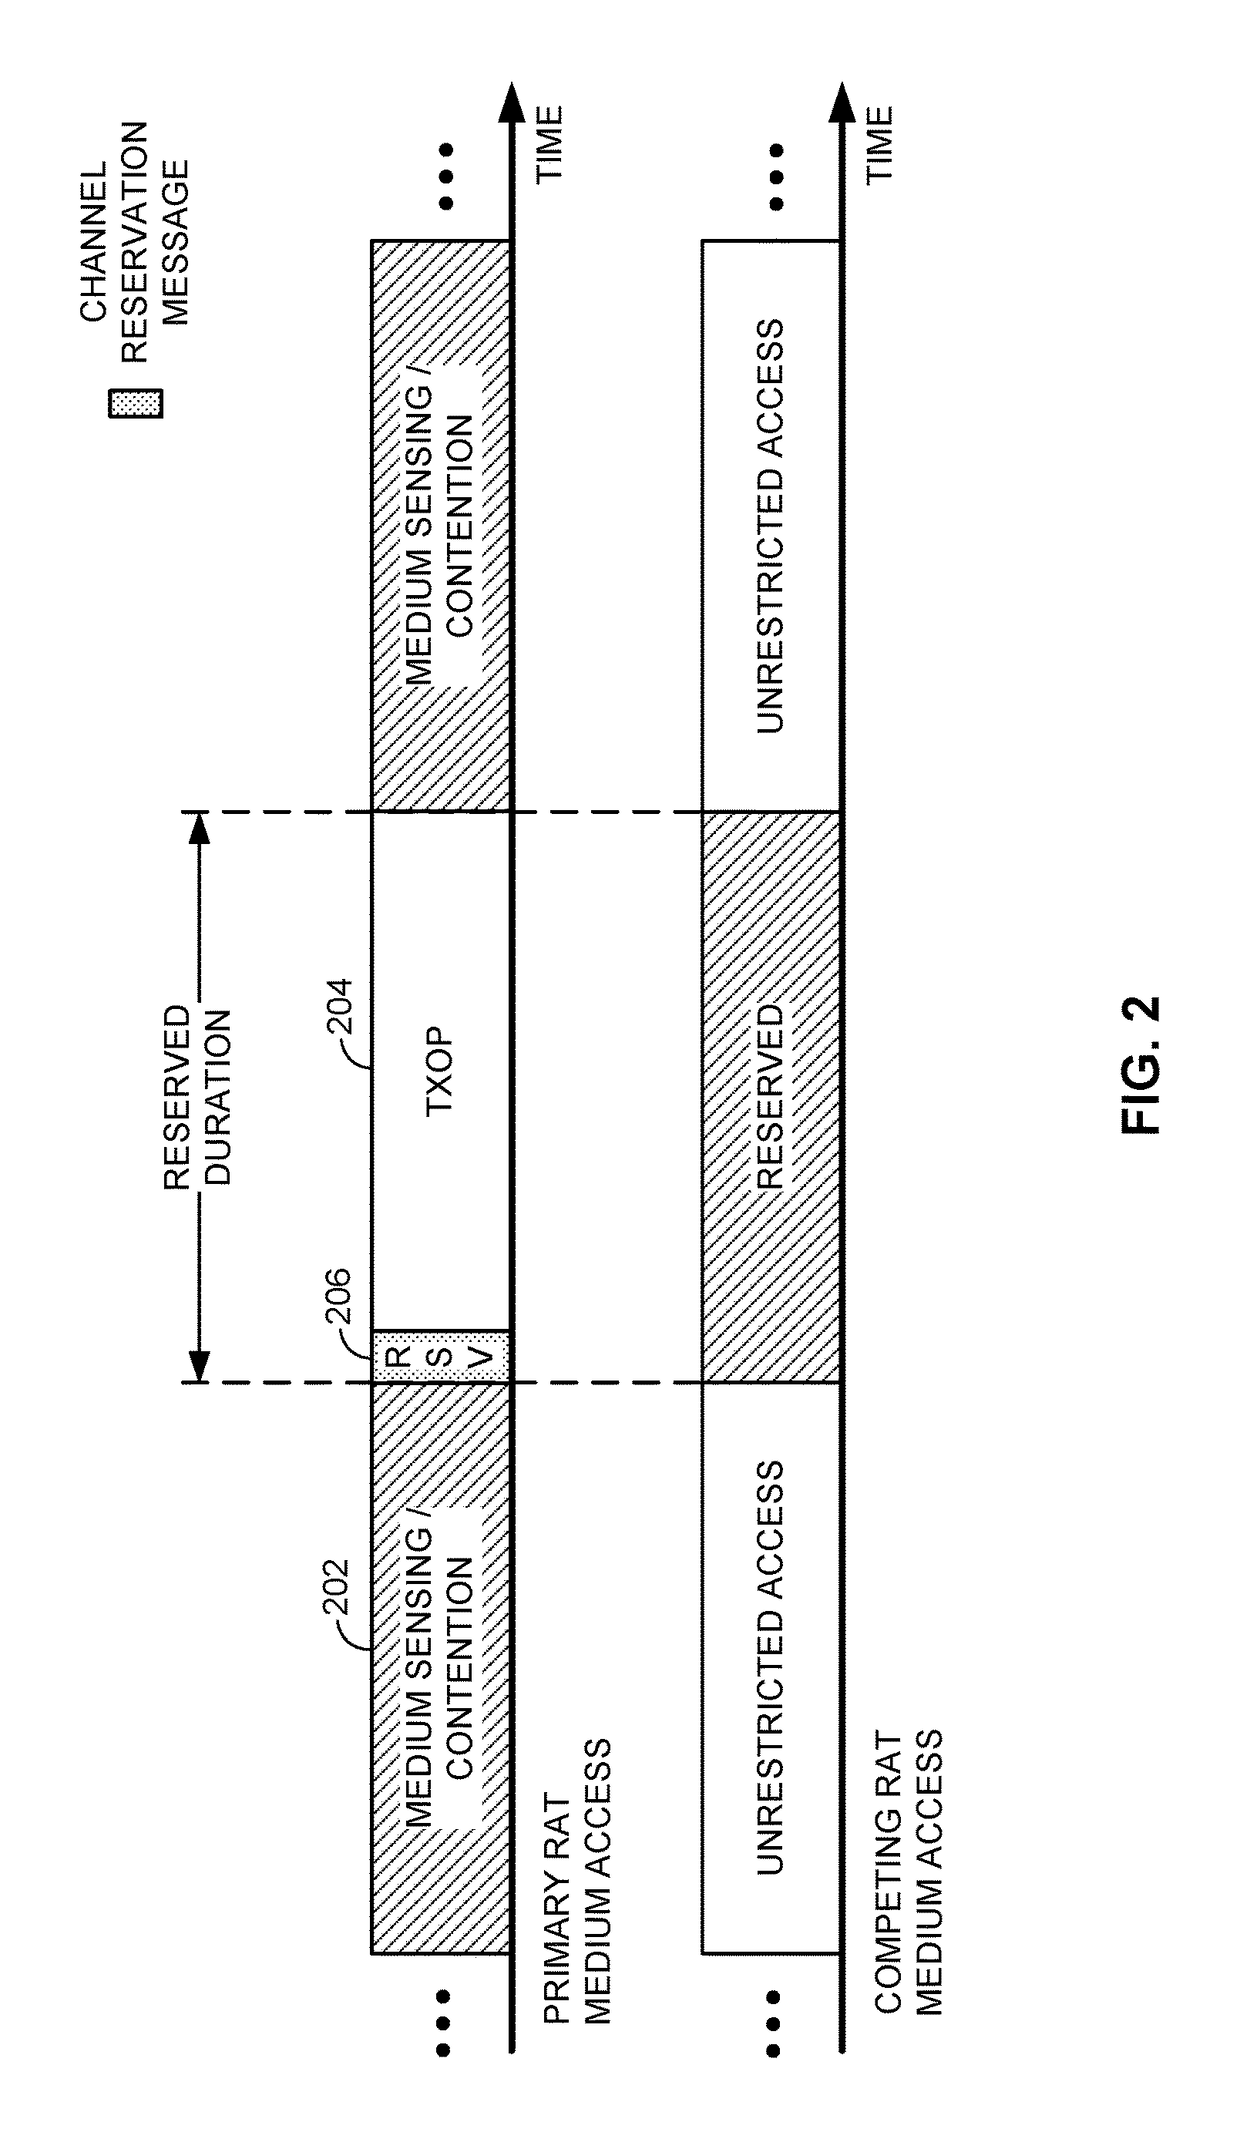 Robust channel reservation on a shared communication medium